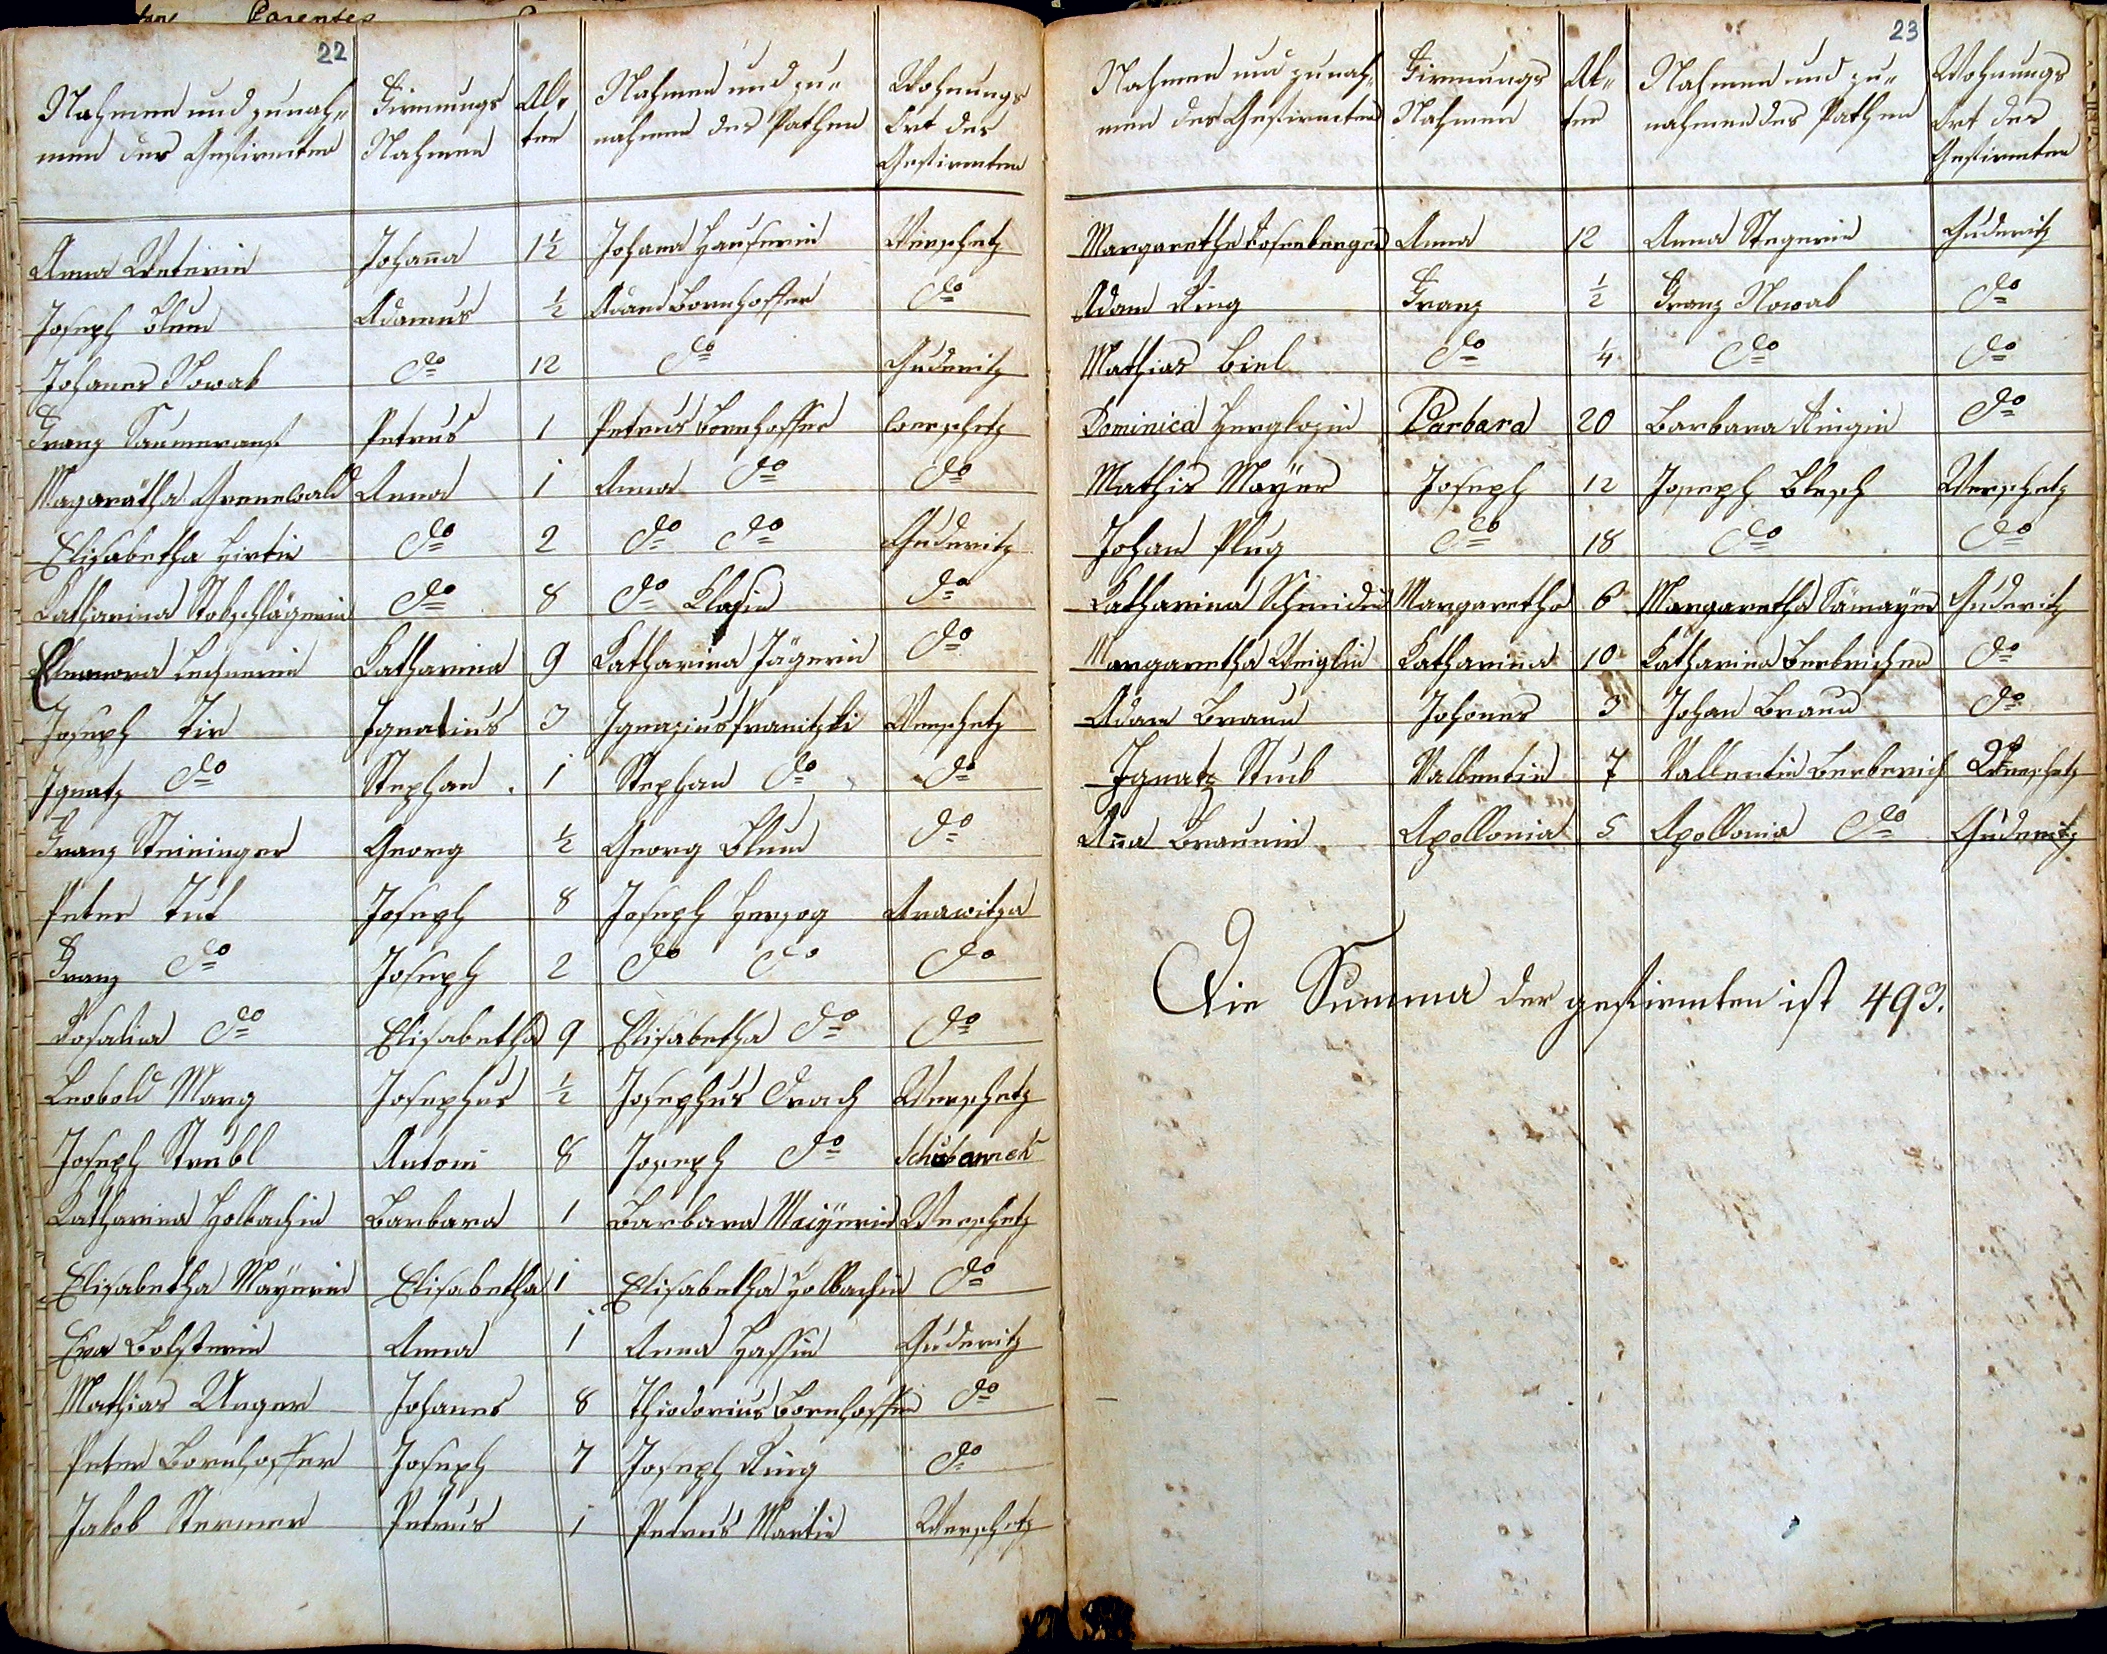 images/church_records/MARRIAGES/1829-1851M/022 i 023